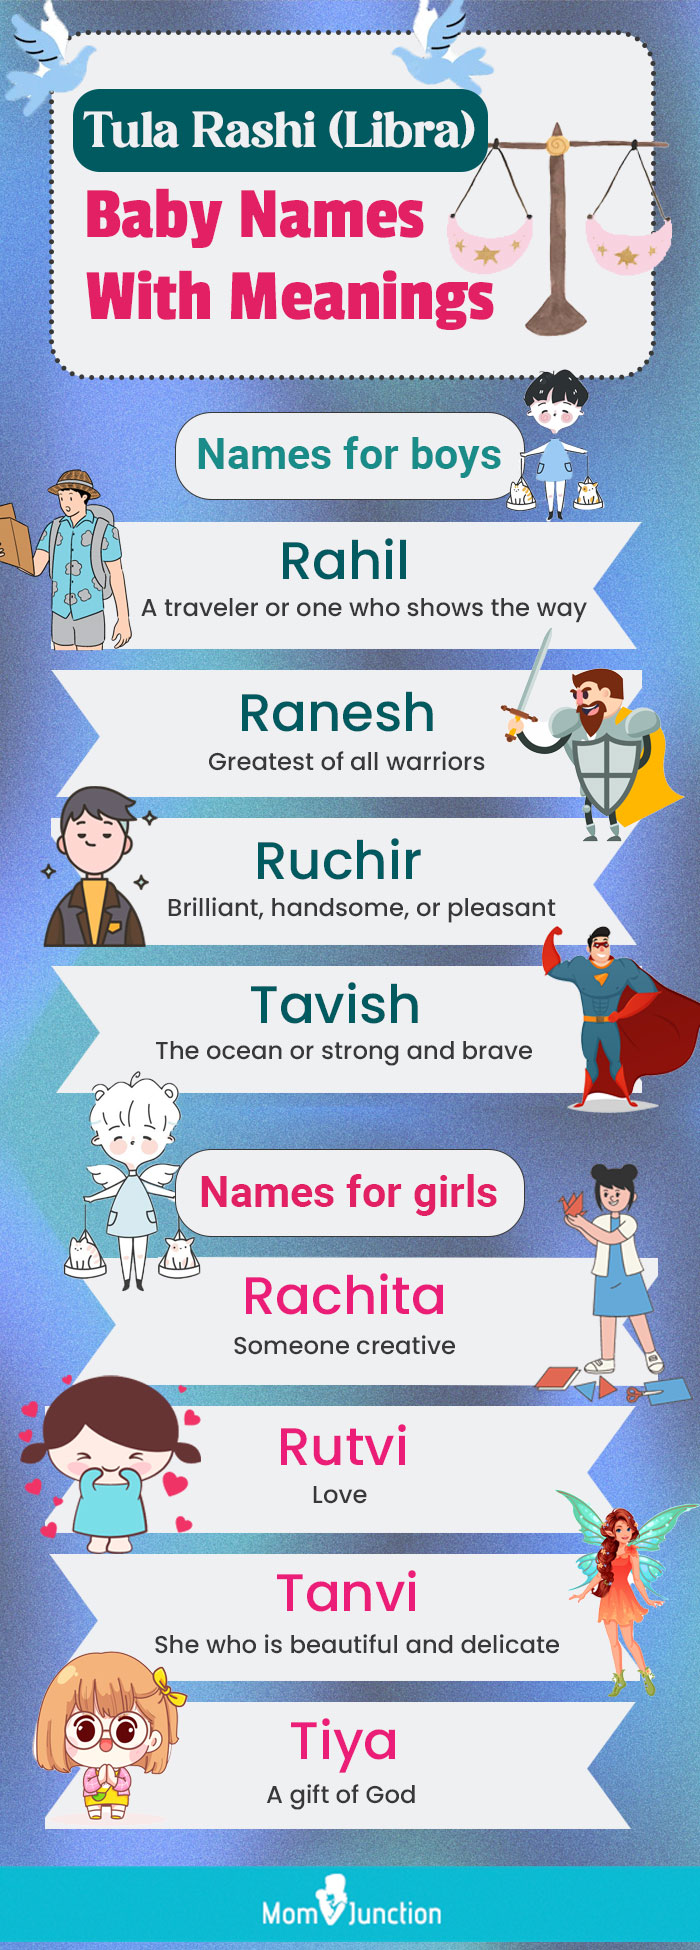 list of baby names for boys